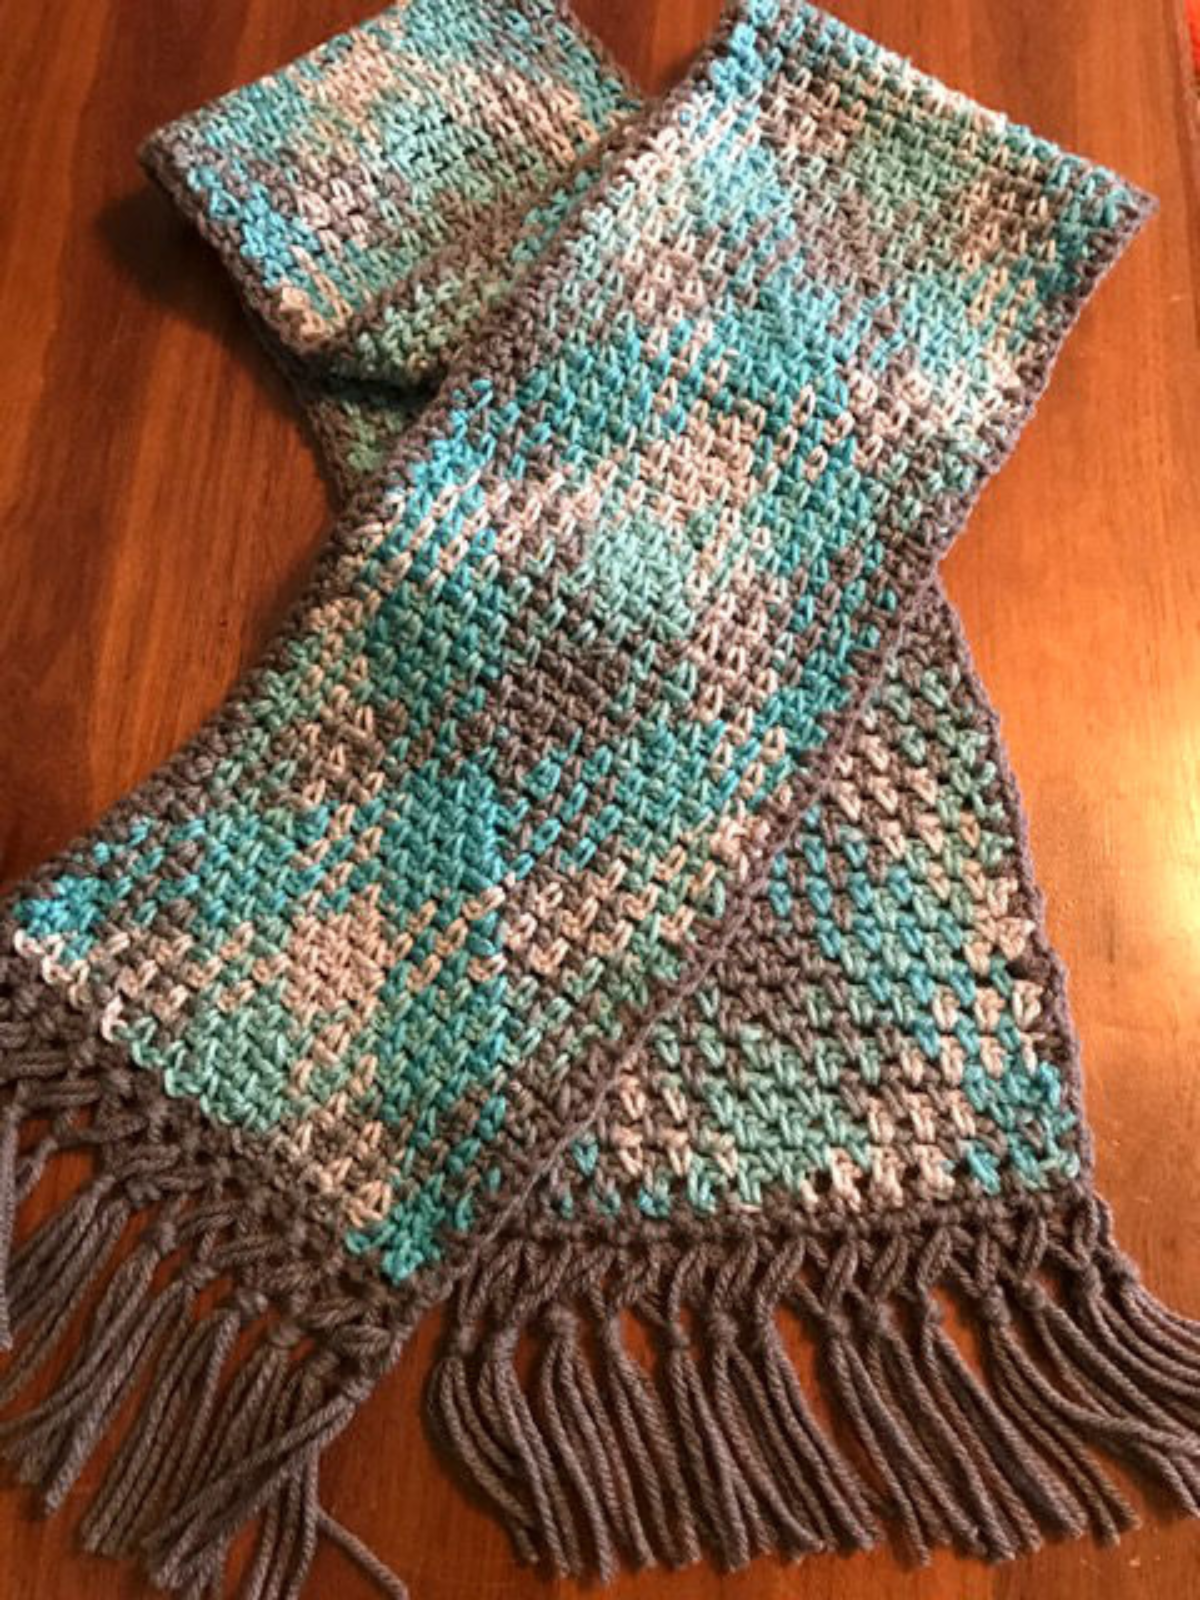 Planned Color Pooling with long color changing variegated yarn